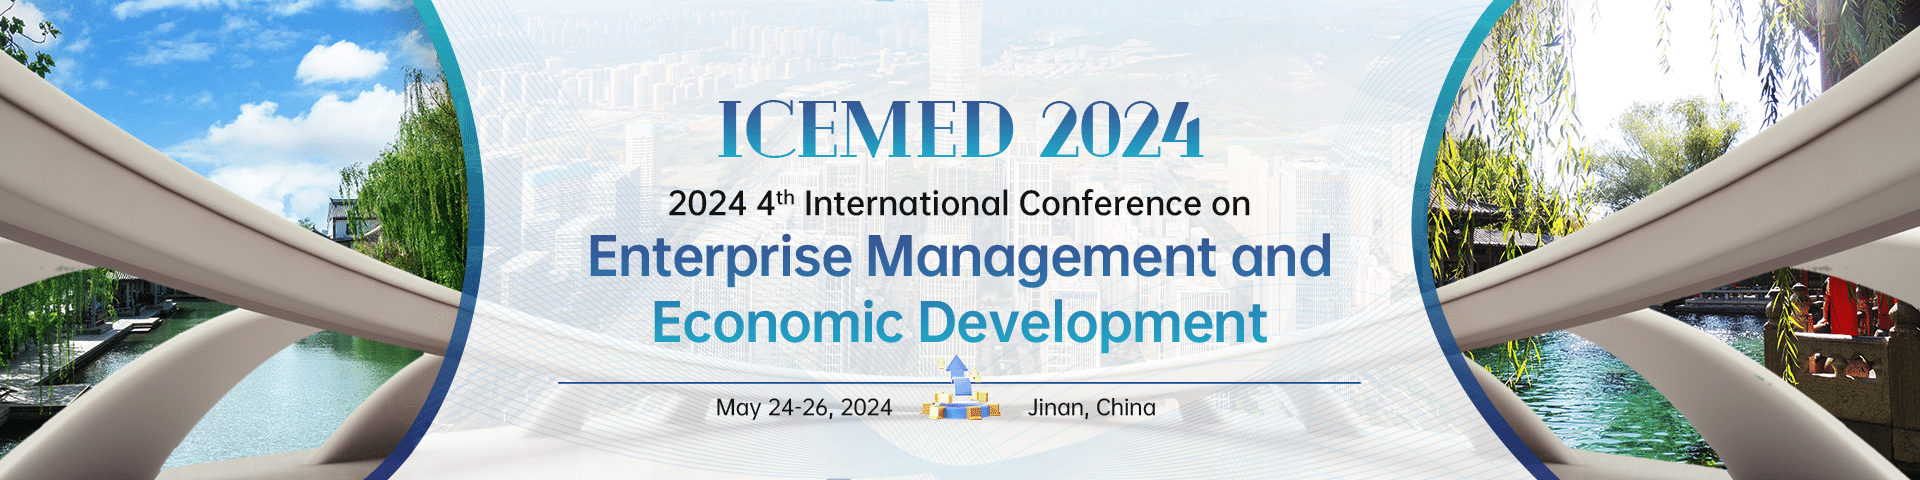 2024 4th International Conference on Enterprise Management and Economic Development (ICEMED2024)